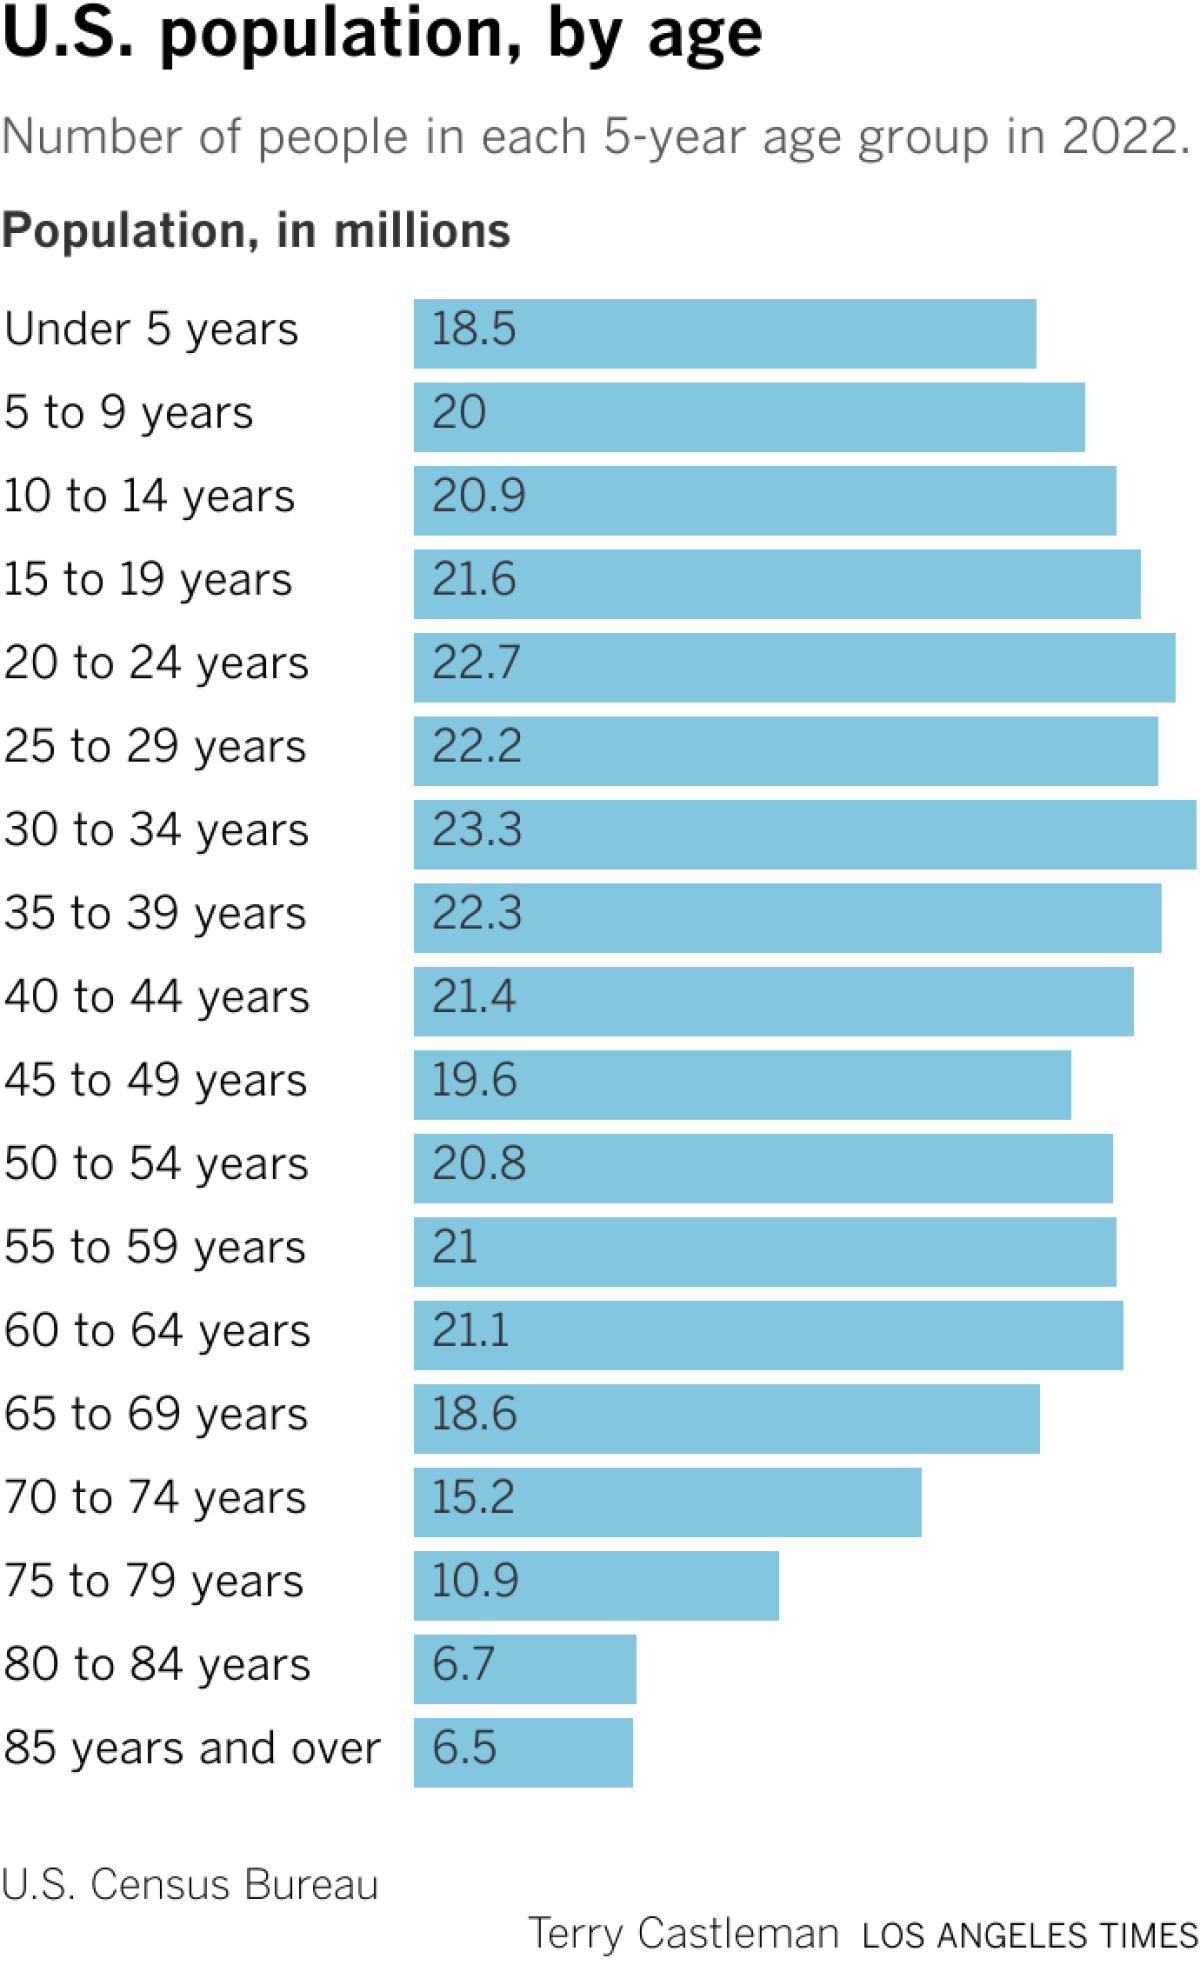 Bar chart shows the United States population by 5-year age group. The 30 to 34 year old age group is the largest.